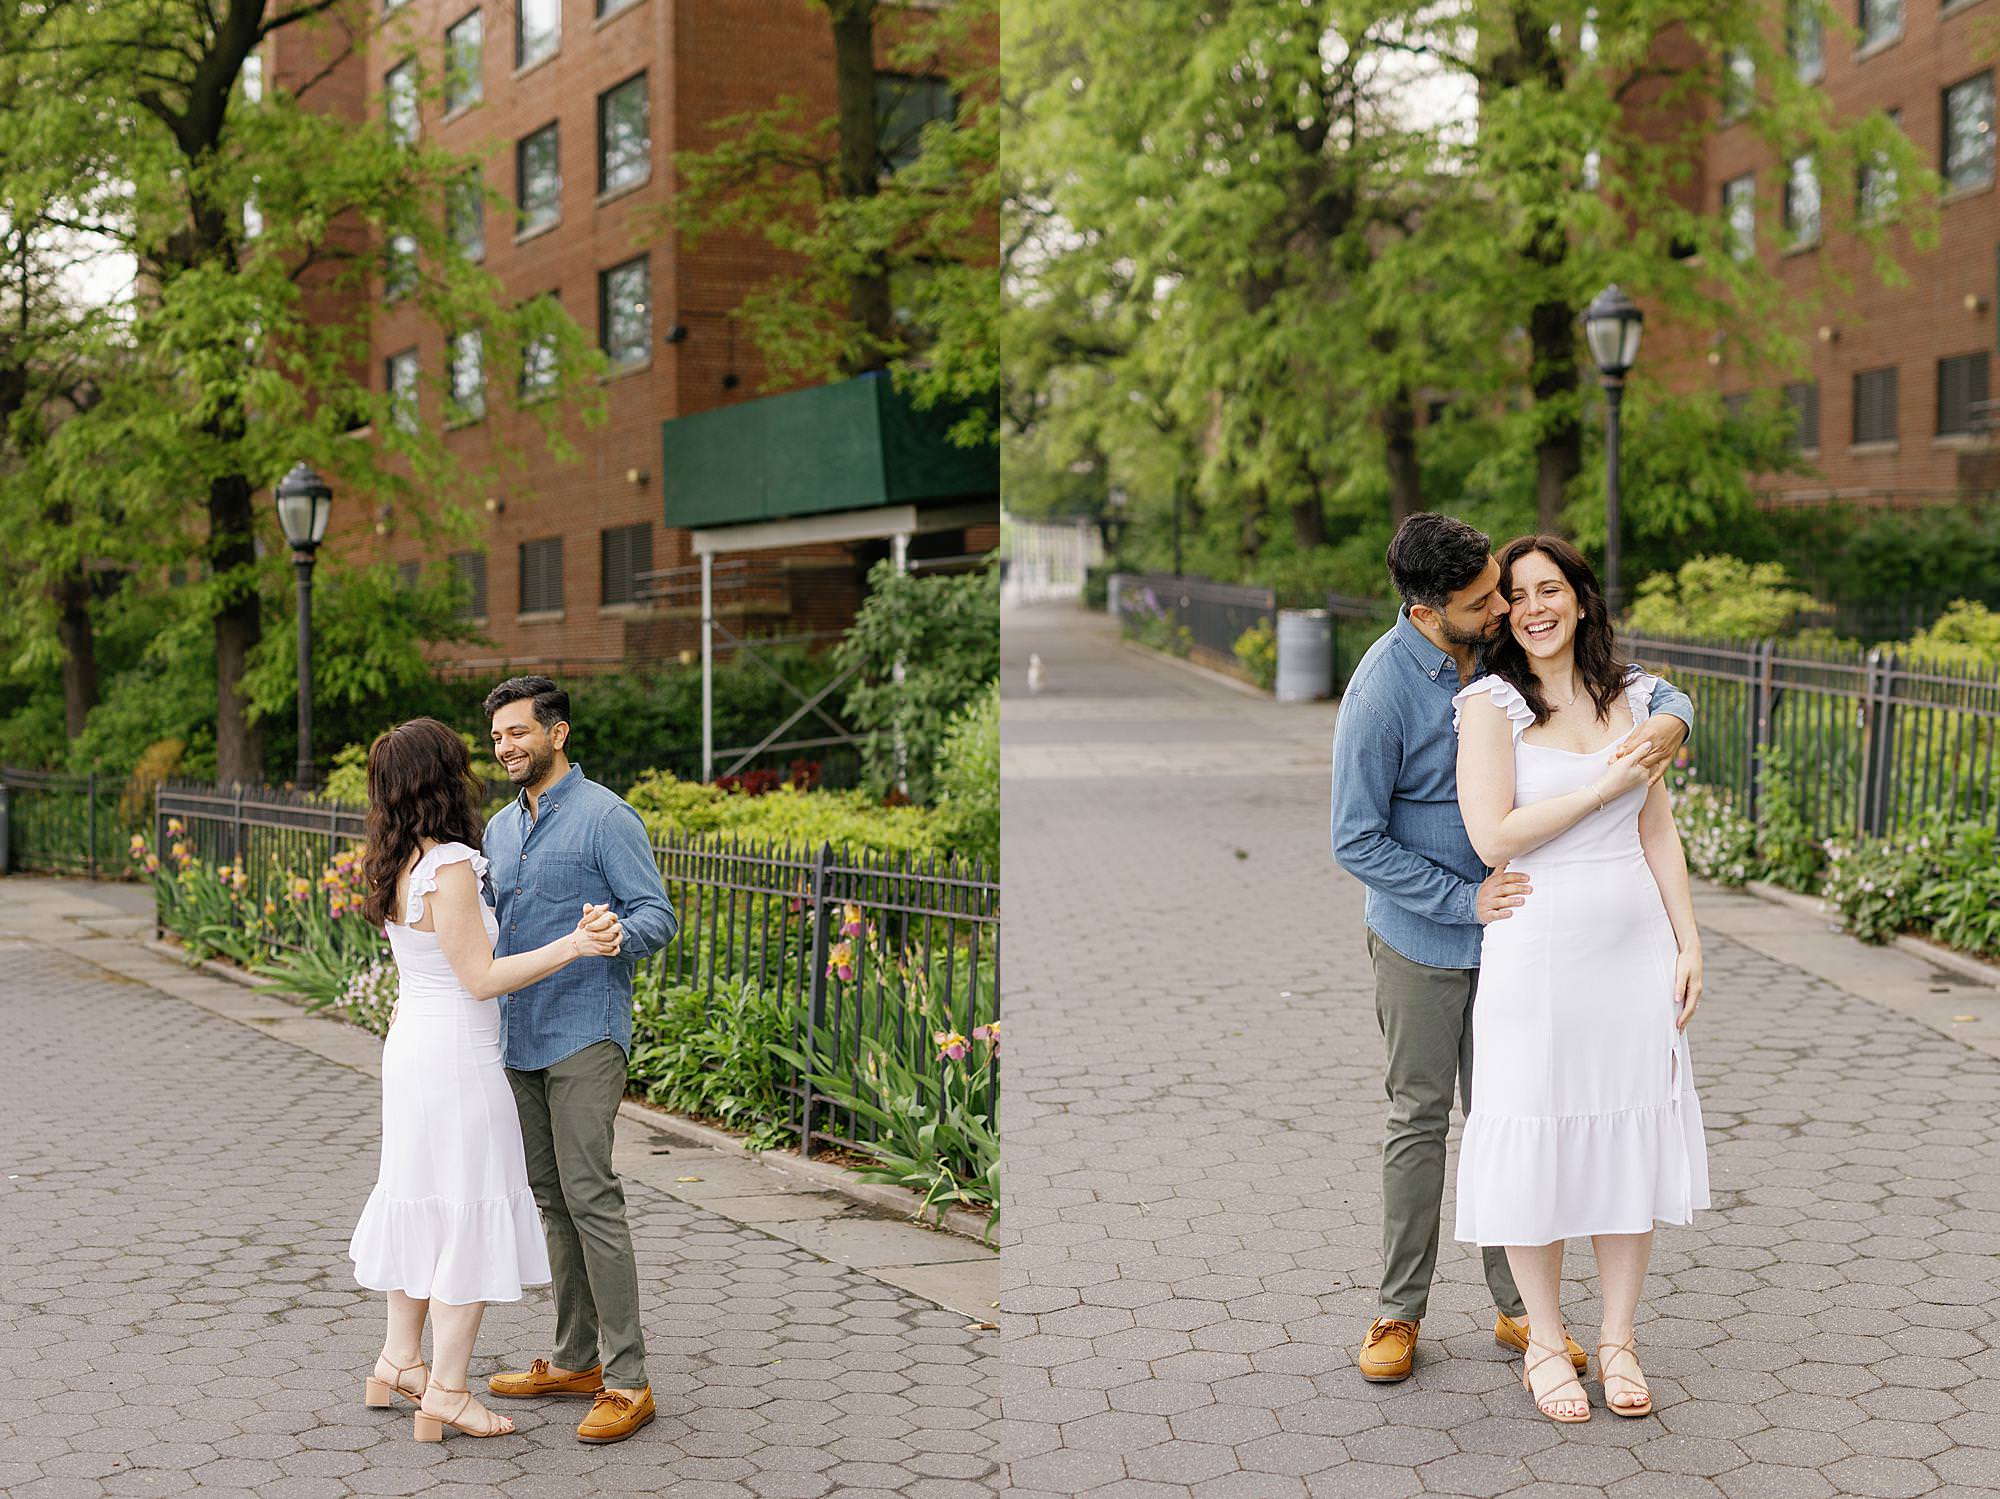 Brooklyn heights promenade engagement session